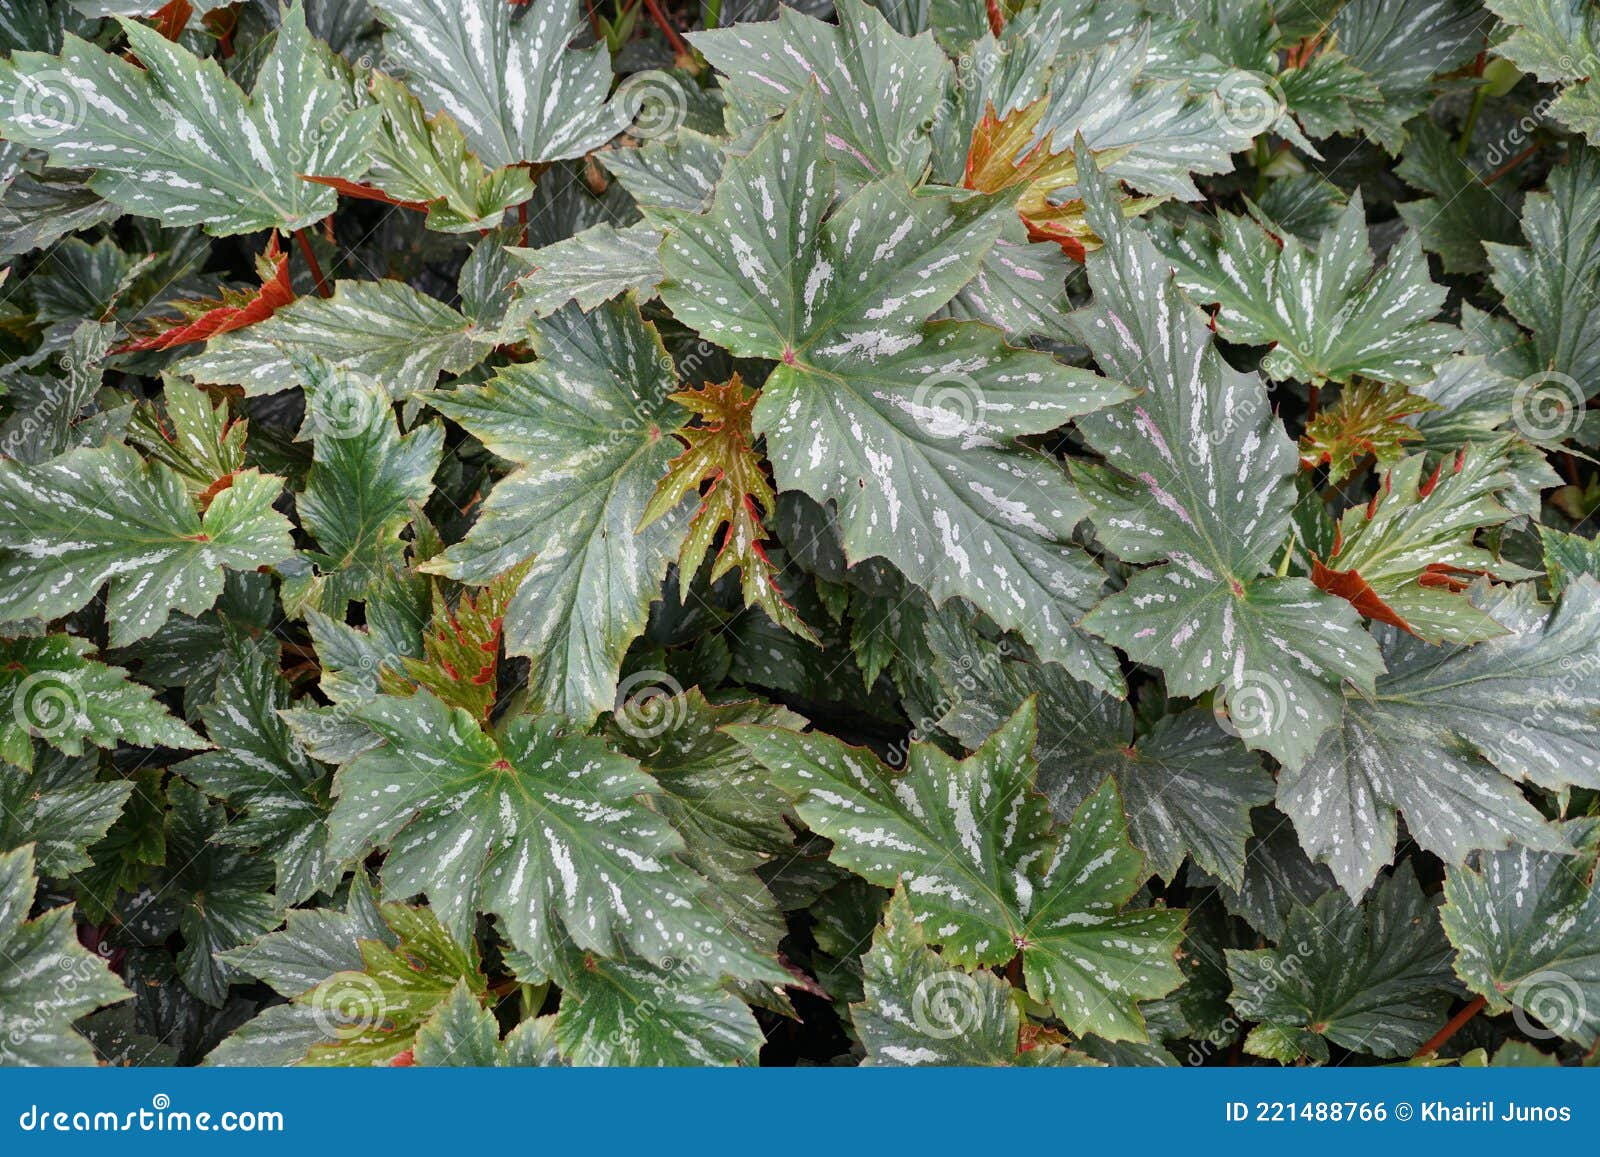 unique  and pattern of cane-like begonia `lana` leaves